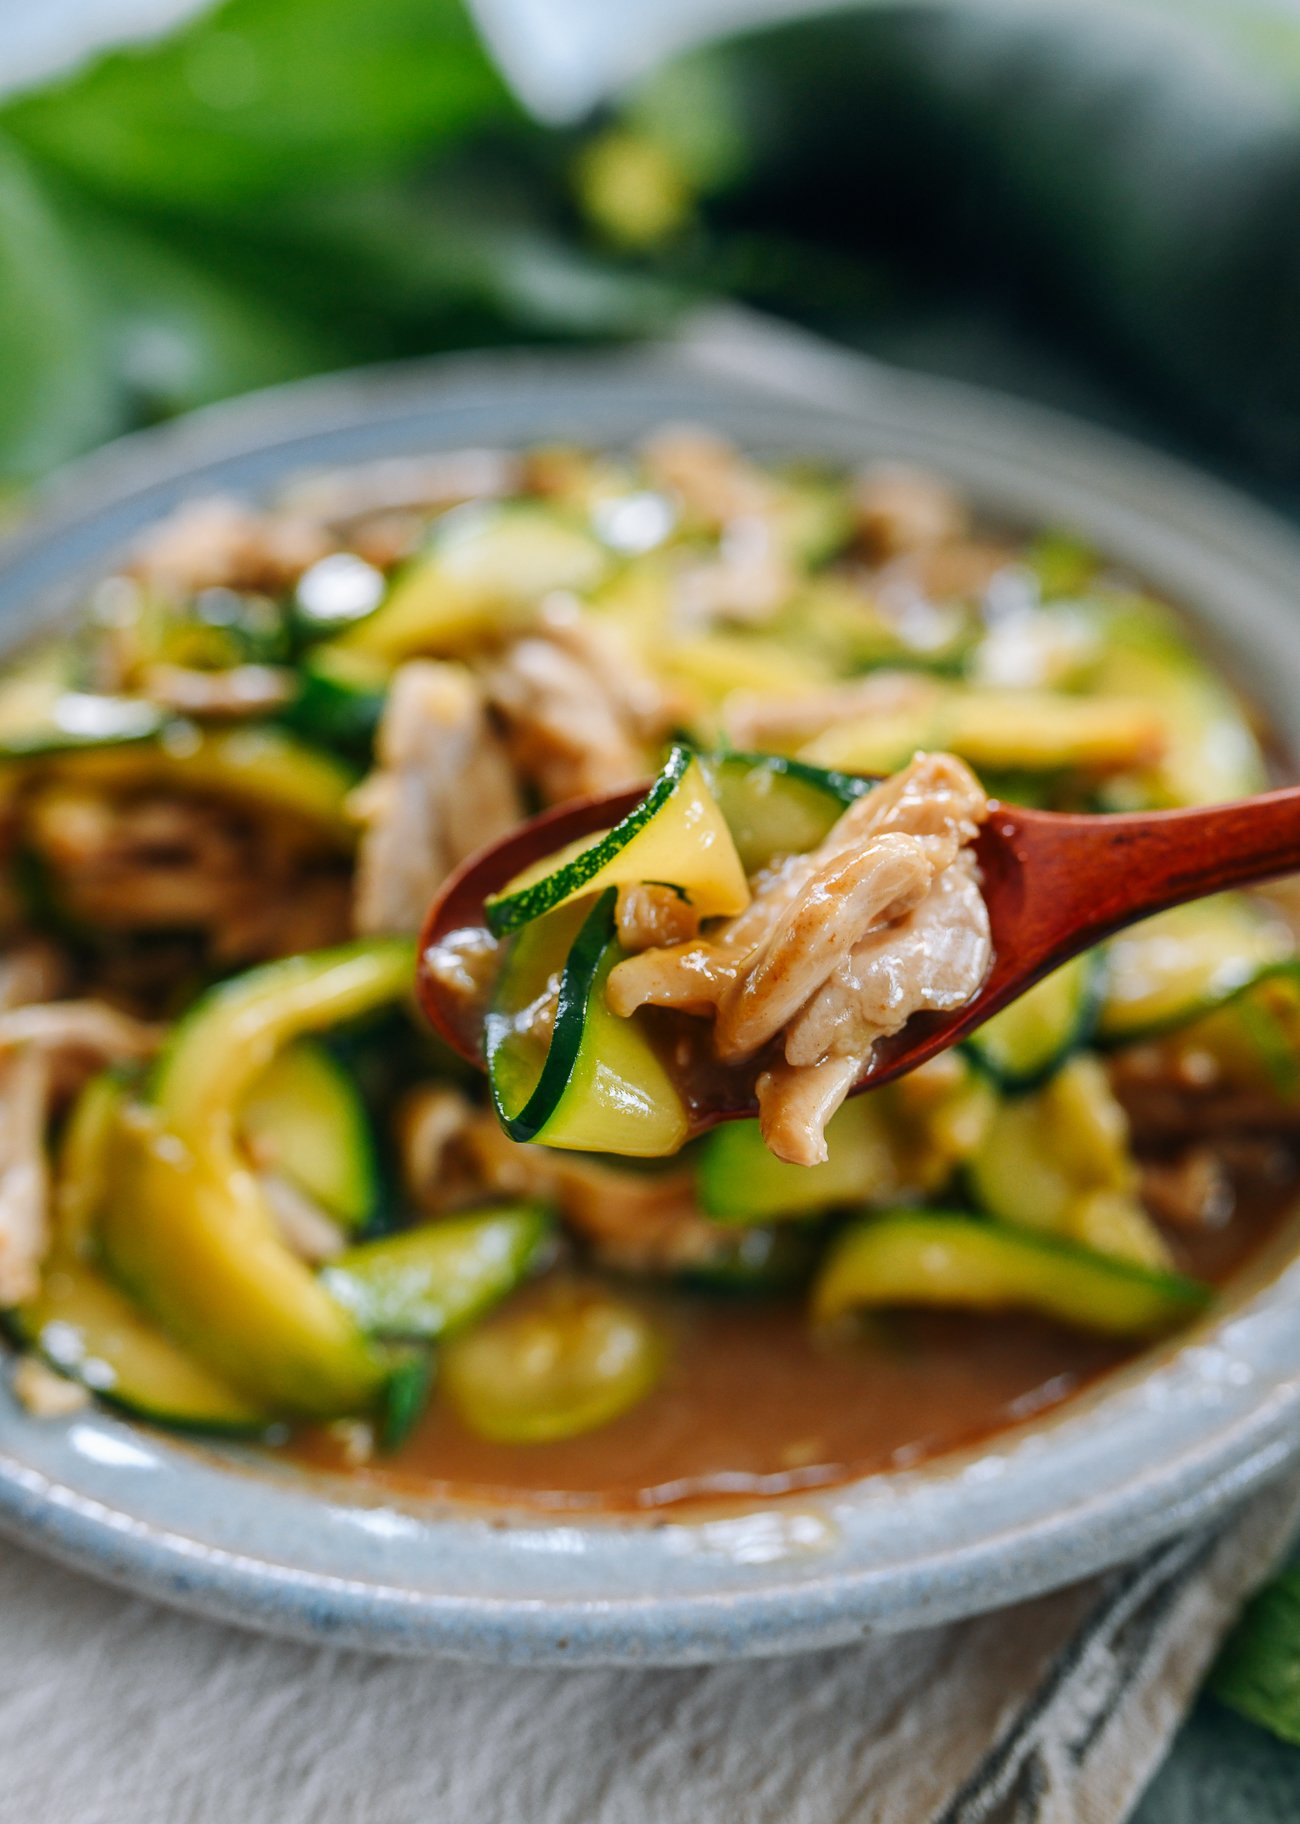 Spoonful of stir-fried zucchini with chicken